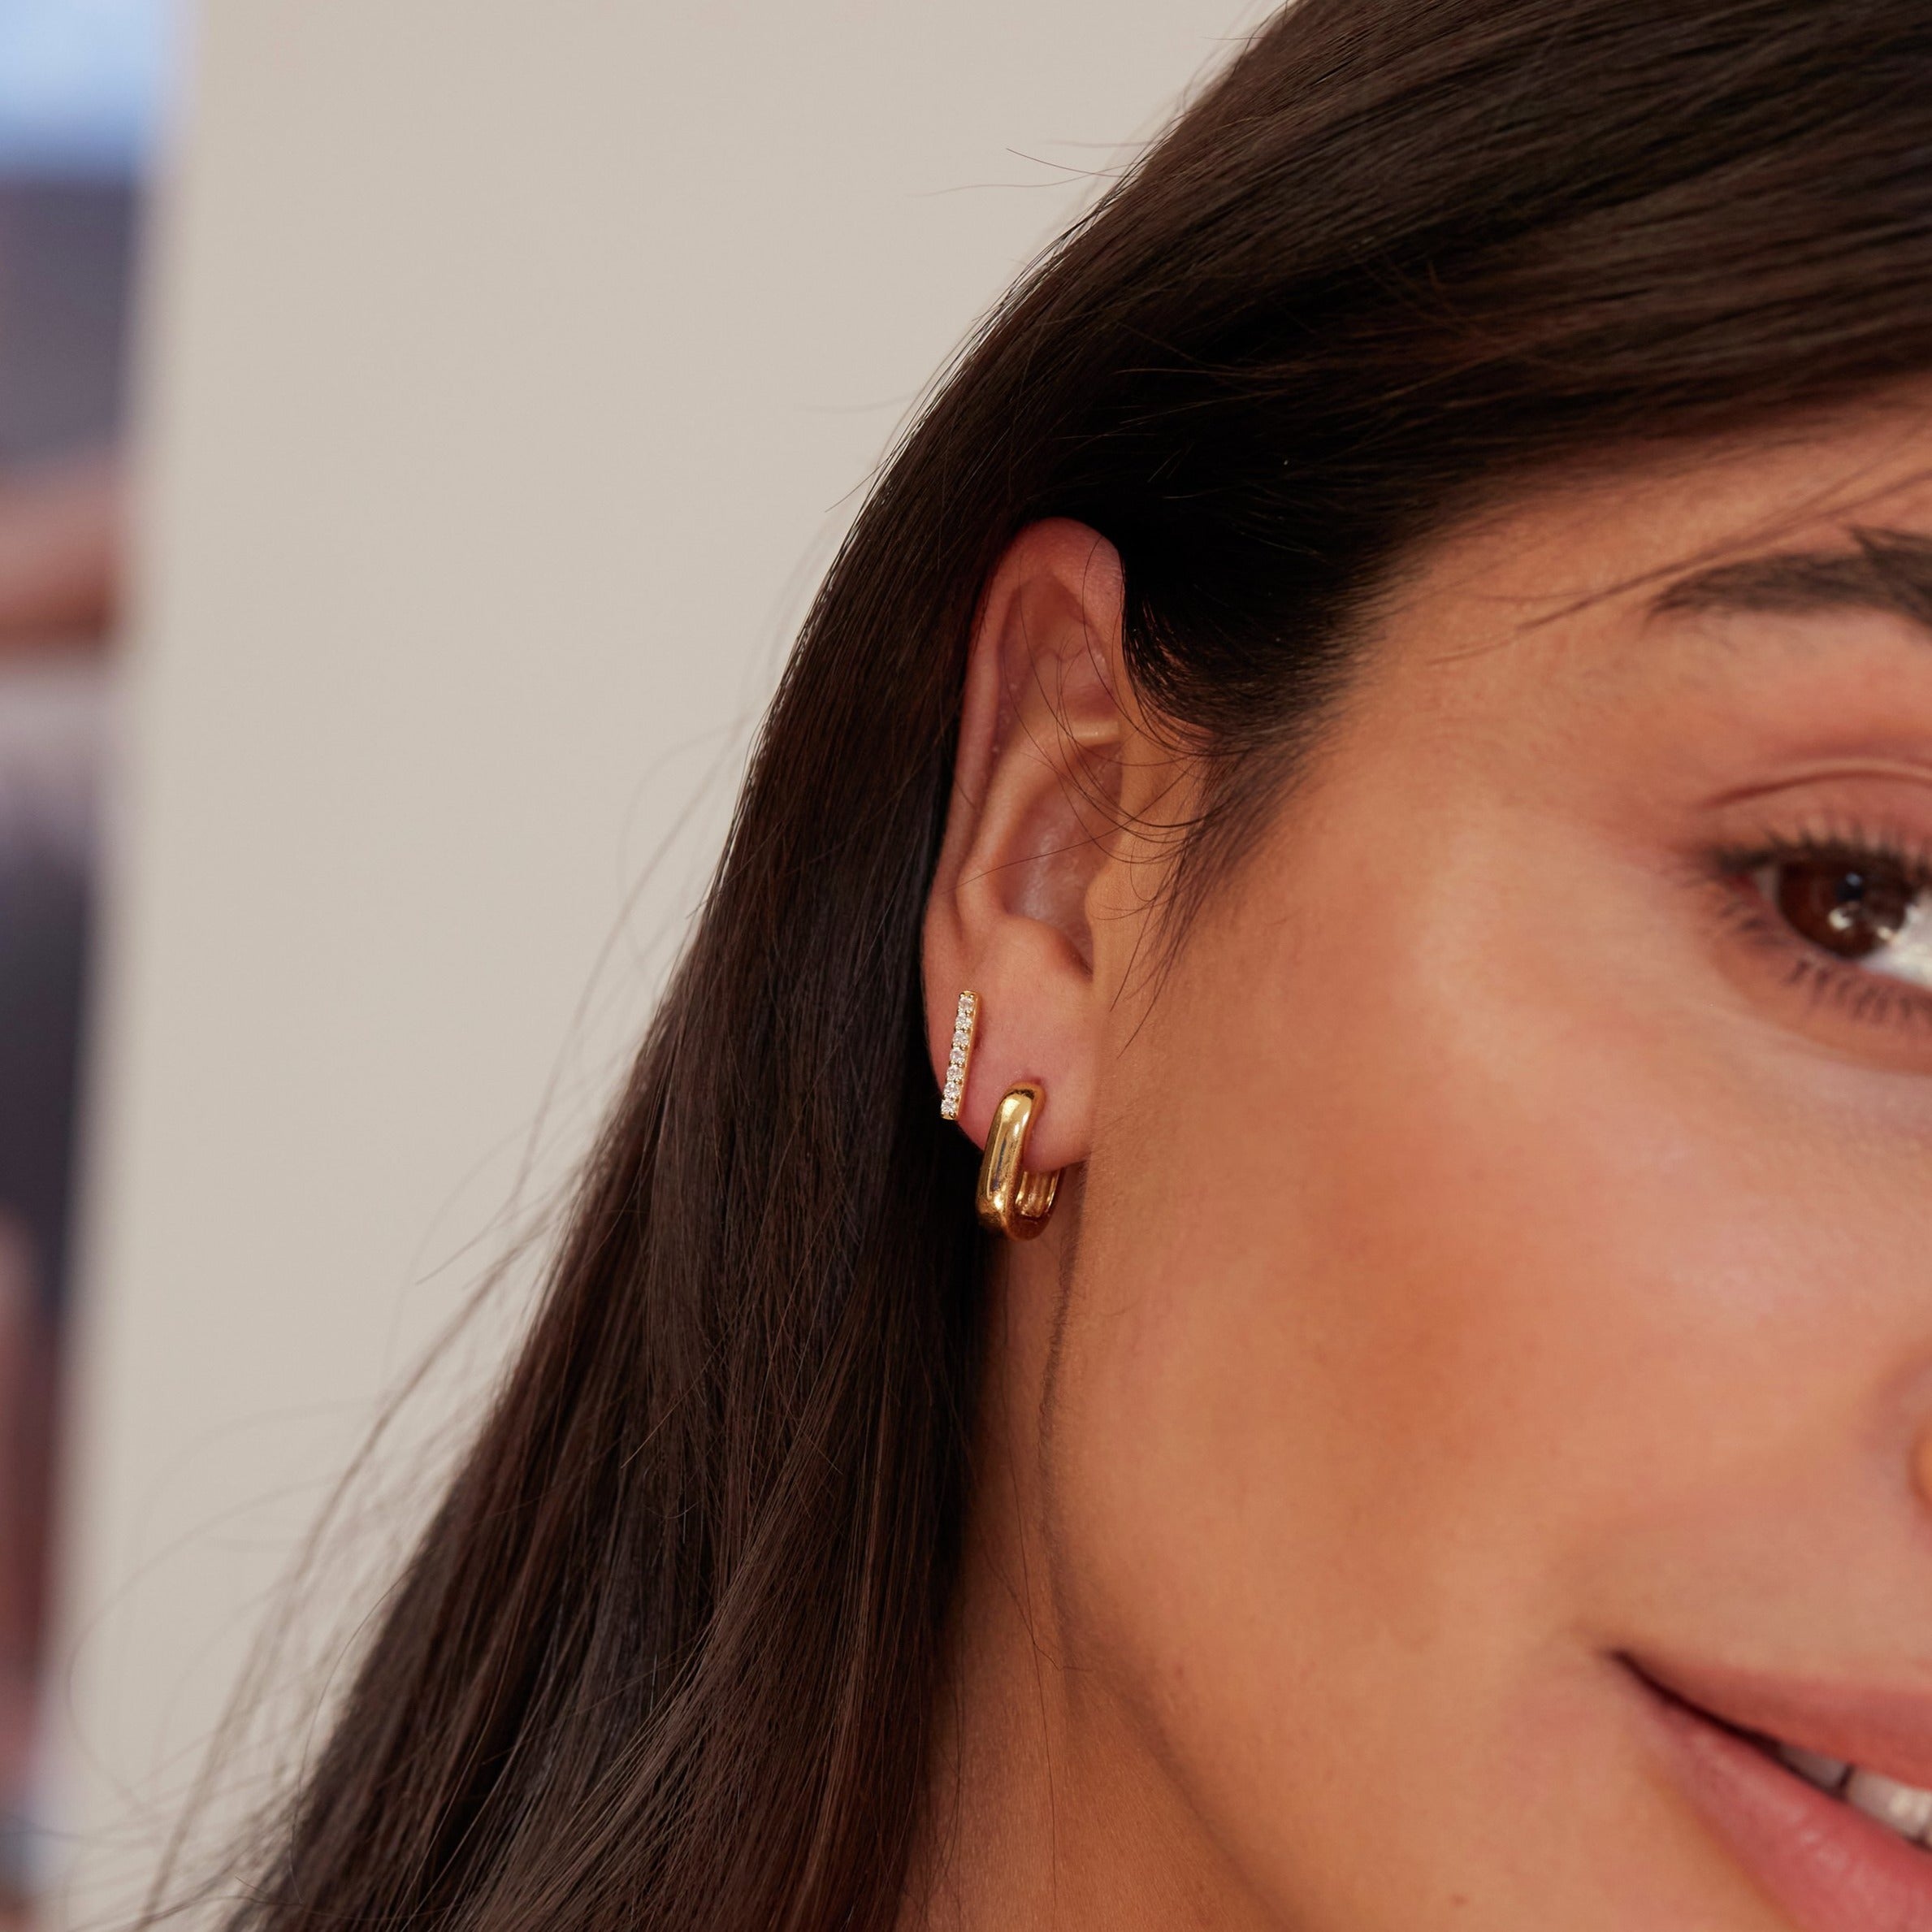 A gold thick squared hoop earring and a gold diamond style bar stud in an ear lobe